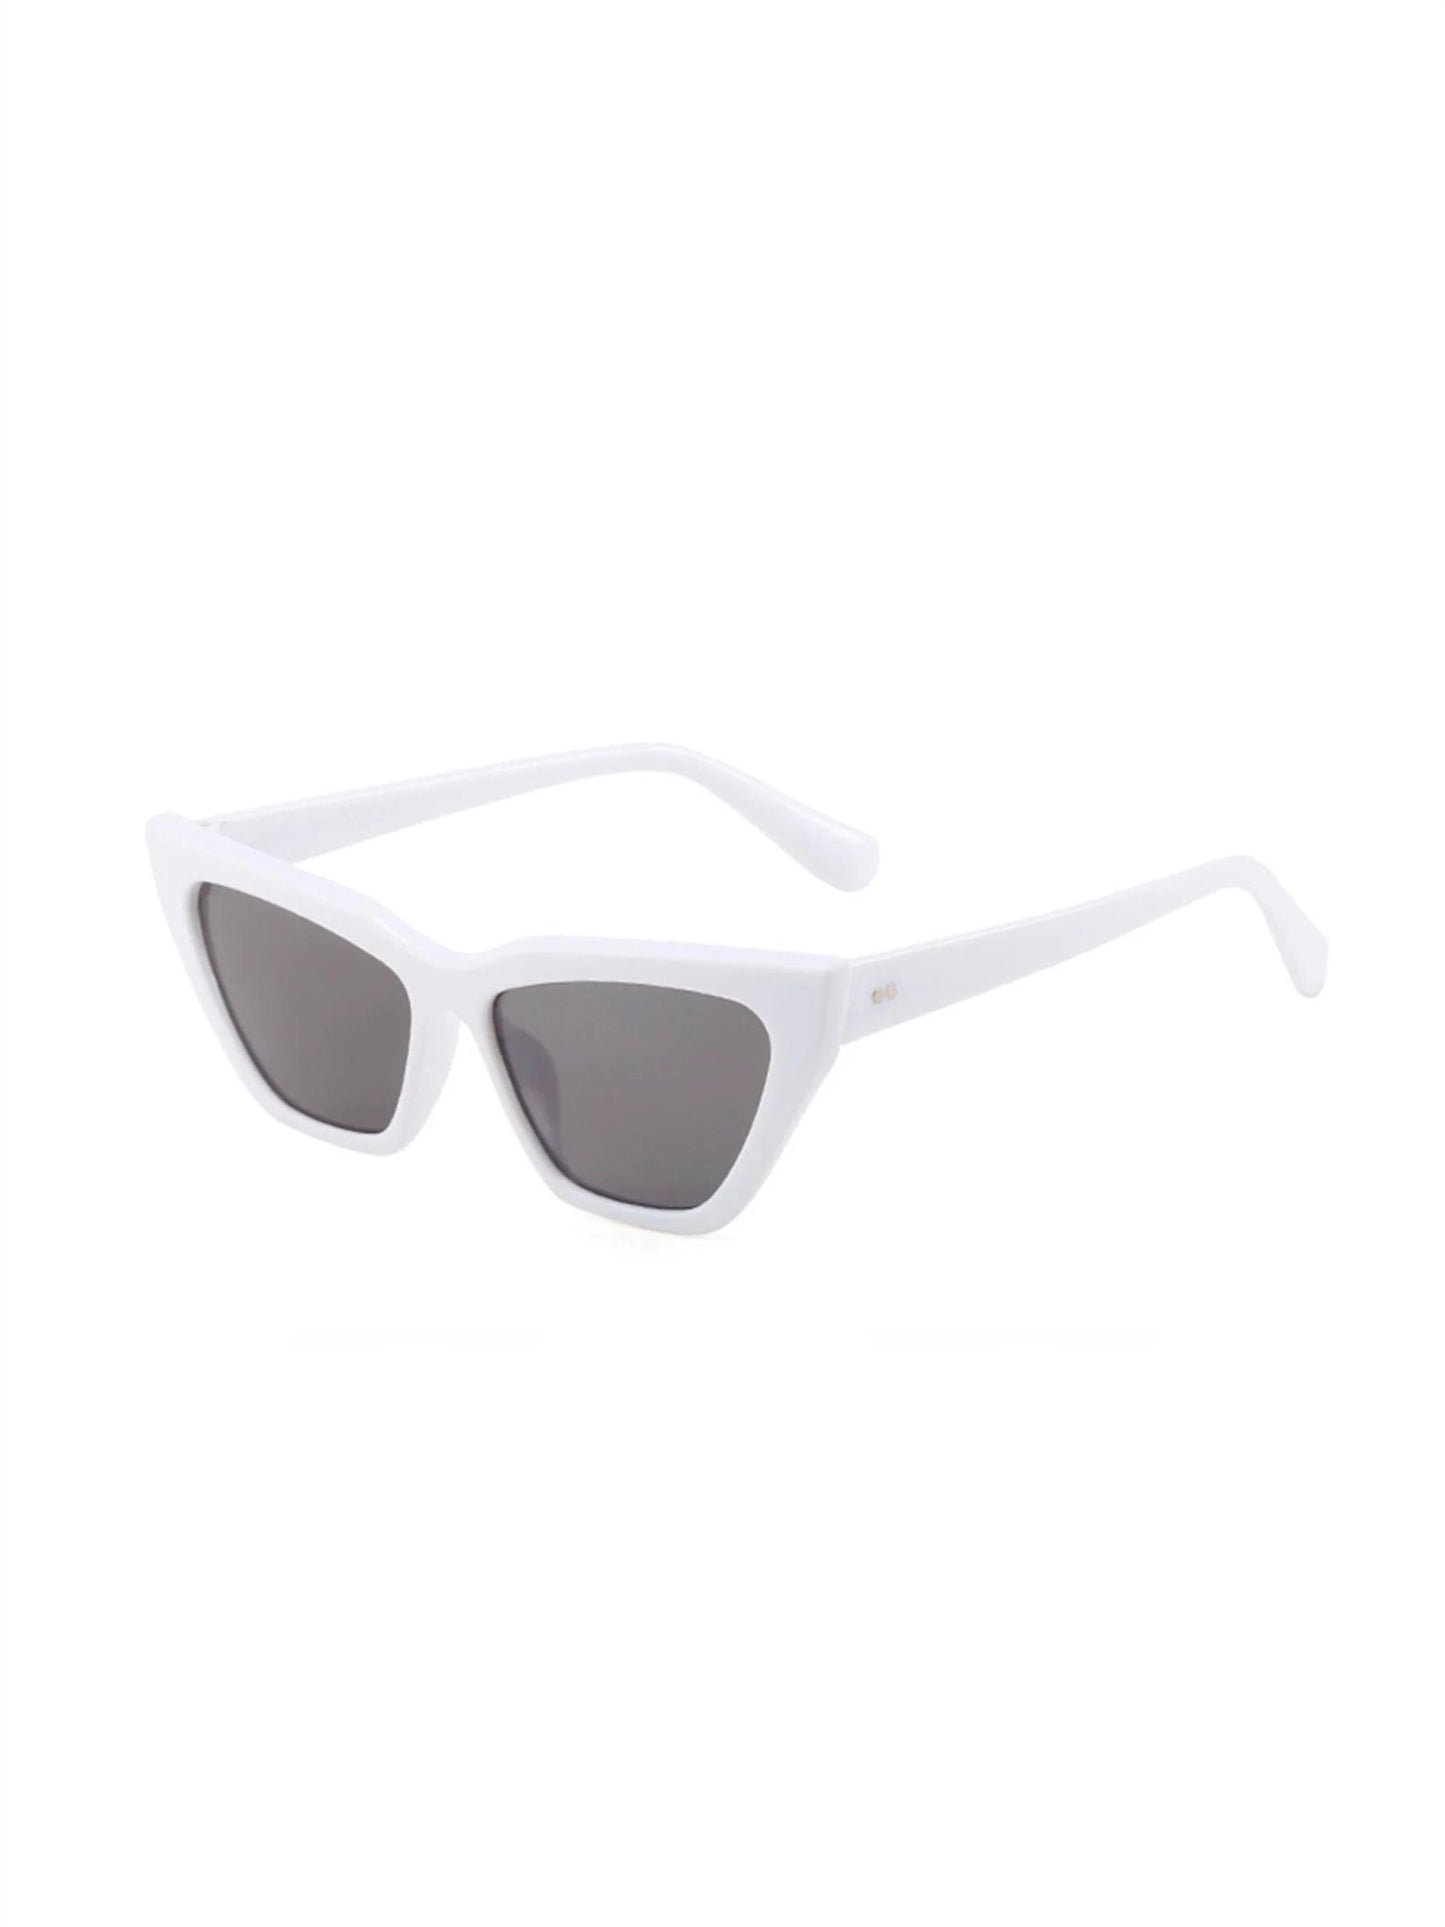 Sunglasses - White Edgy - at home